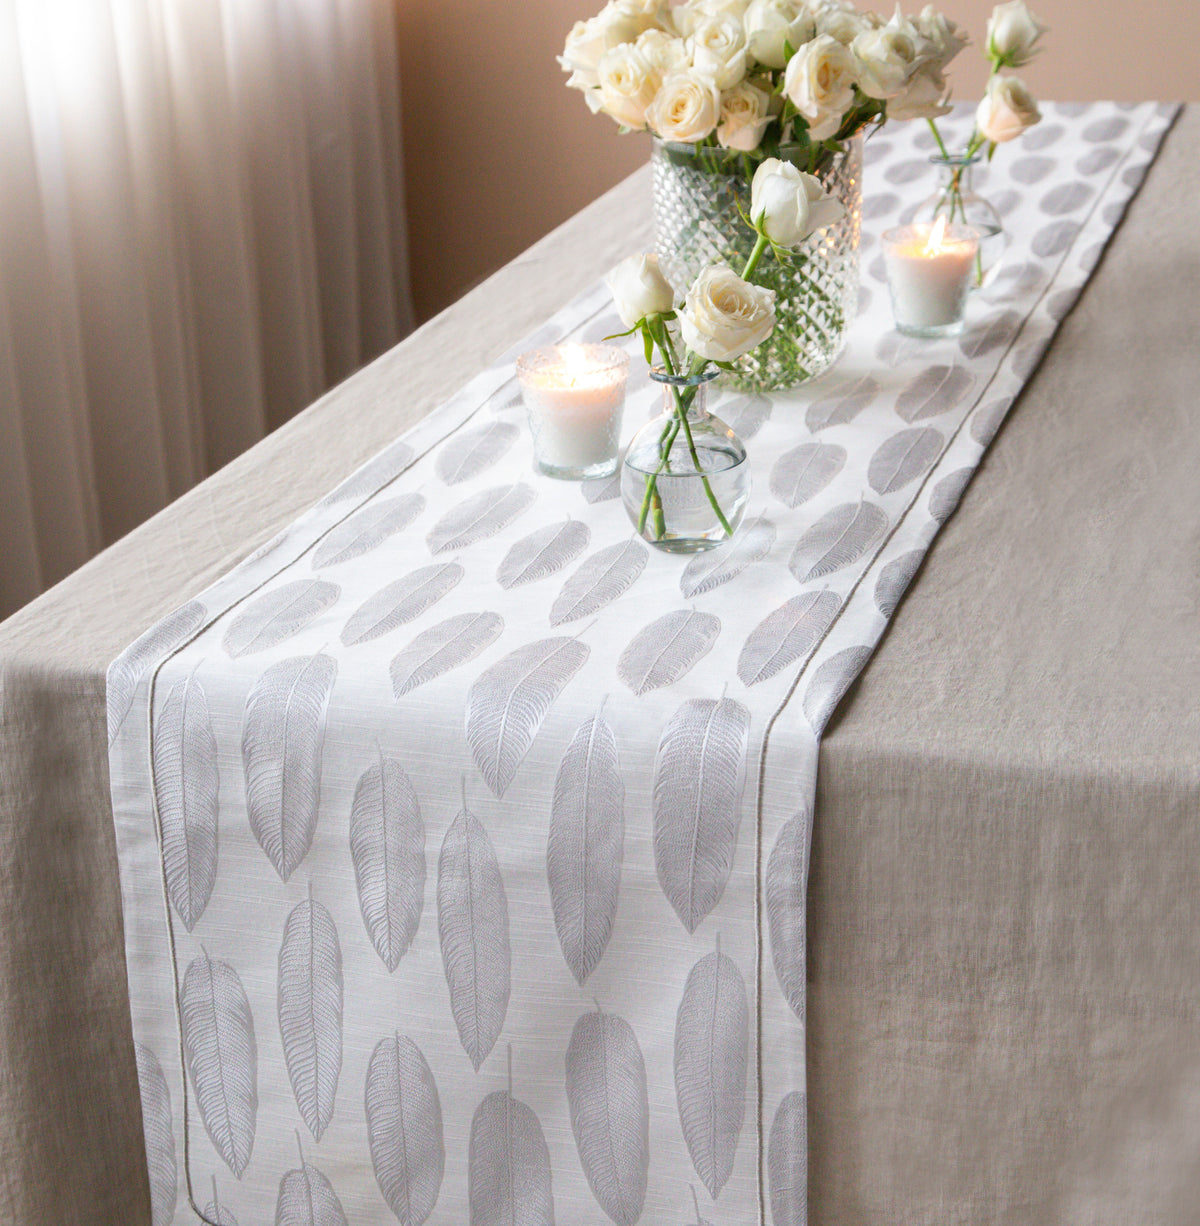 Off-white Jewel toned Textured table Linen Set